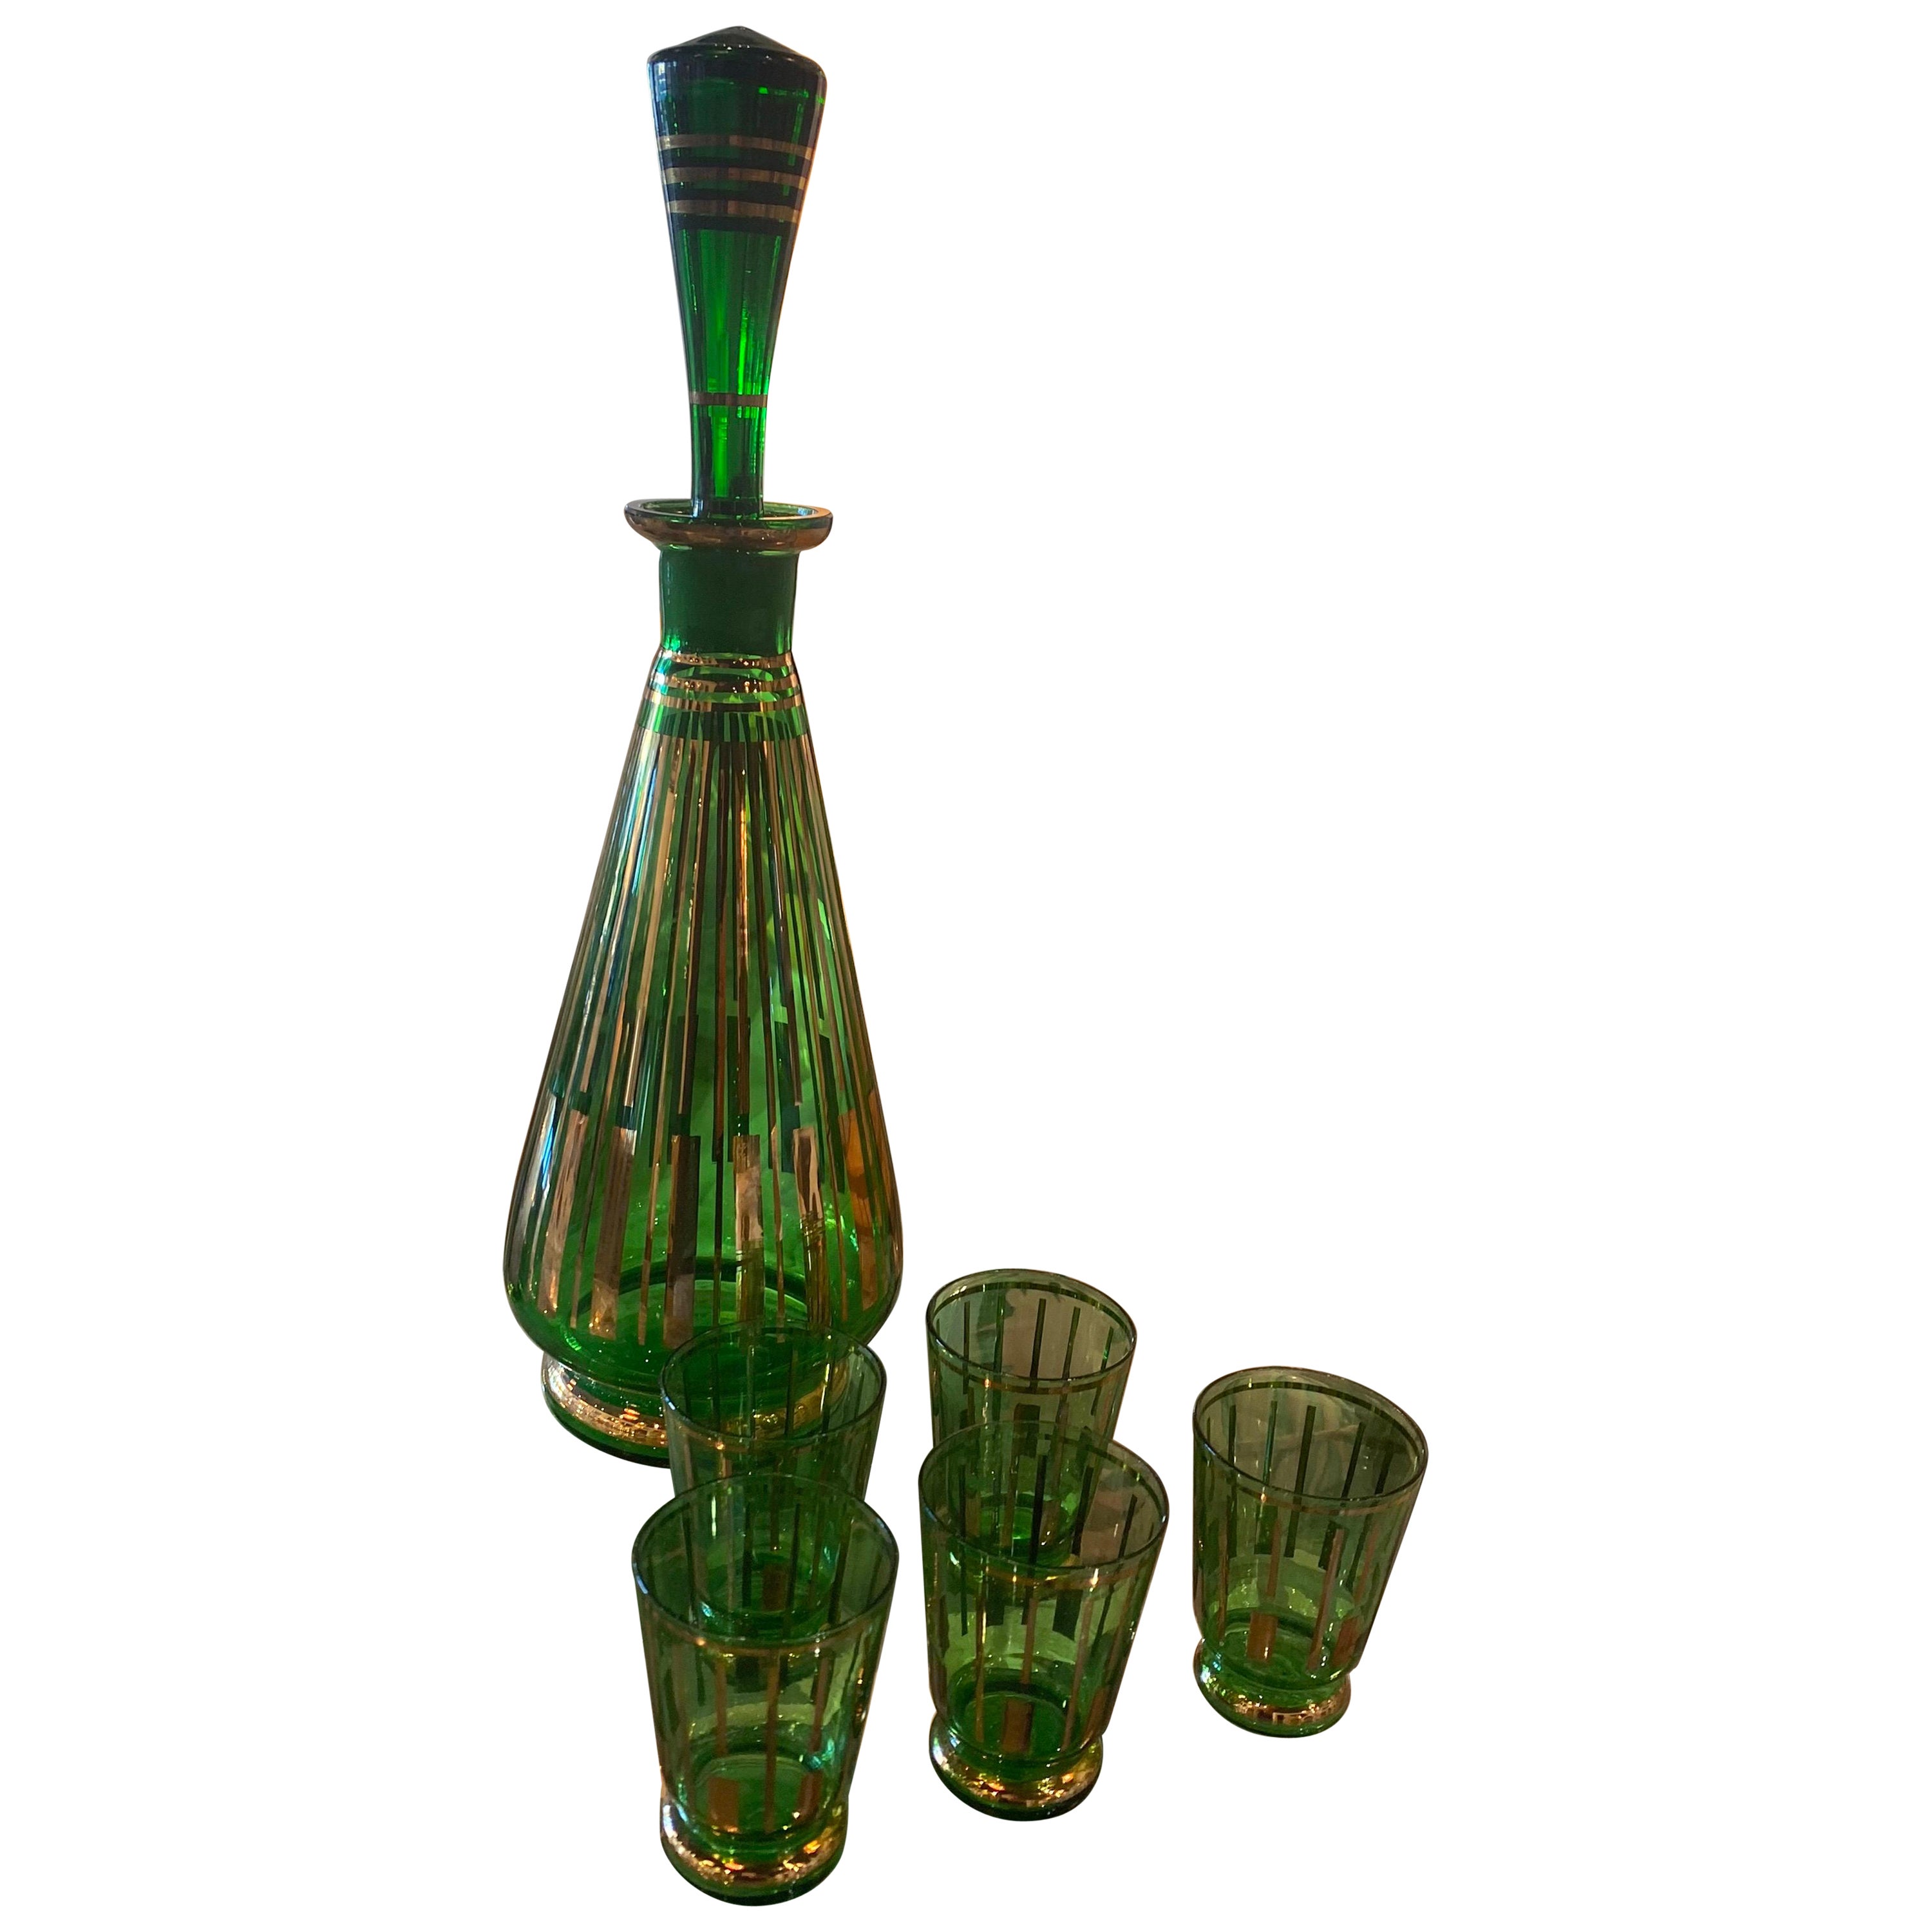 Vintage Green Glass Decanter with Stopper & 5 Shot Drinking Glasses